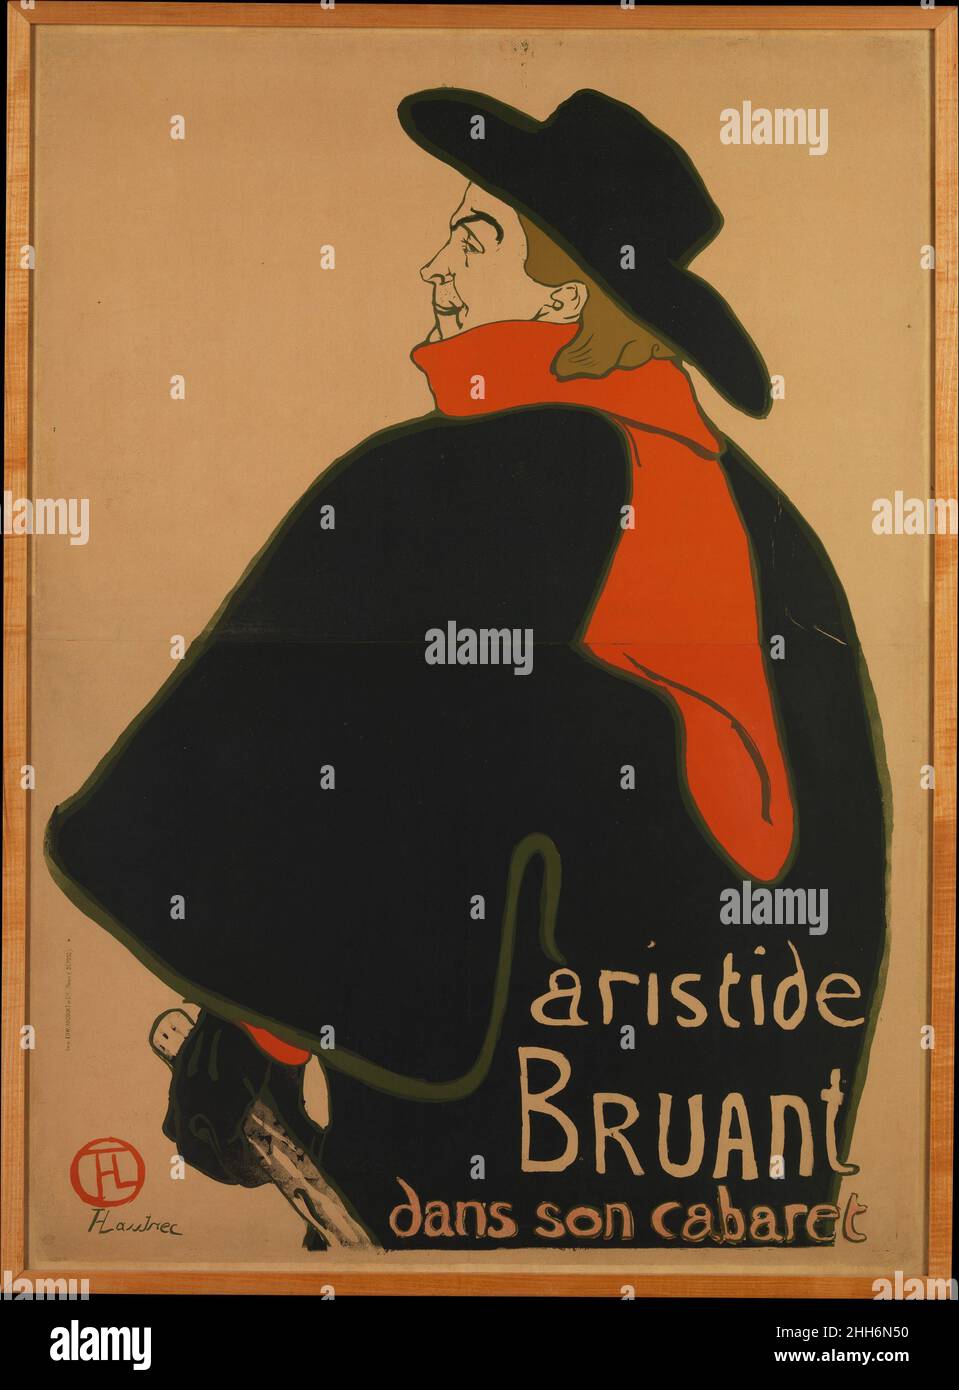 Aristide Bruant, at His Cabaret 1893 Henri de Toulouse-Lautrec French Aristide Bruant was a successful singer, songwriter, and entrepreneur who ran a cabaret in the Montmartre quarter of Paris. When he began performing at up-scale café-concerts on the Champs-Élysées, he immediately commissioned Toulouse-Lautrec to market his rough street persona in a manner that would appeal to a bourgeois audience. Seizing on Bruant's trademark costume of a wide-brimmed hat, cape, and red scarf, Lautrec designed a sparse yet iconic image that promoted both the performer's career as well as his own.. Aristide Stock Photo